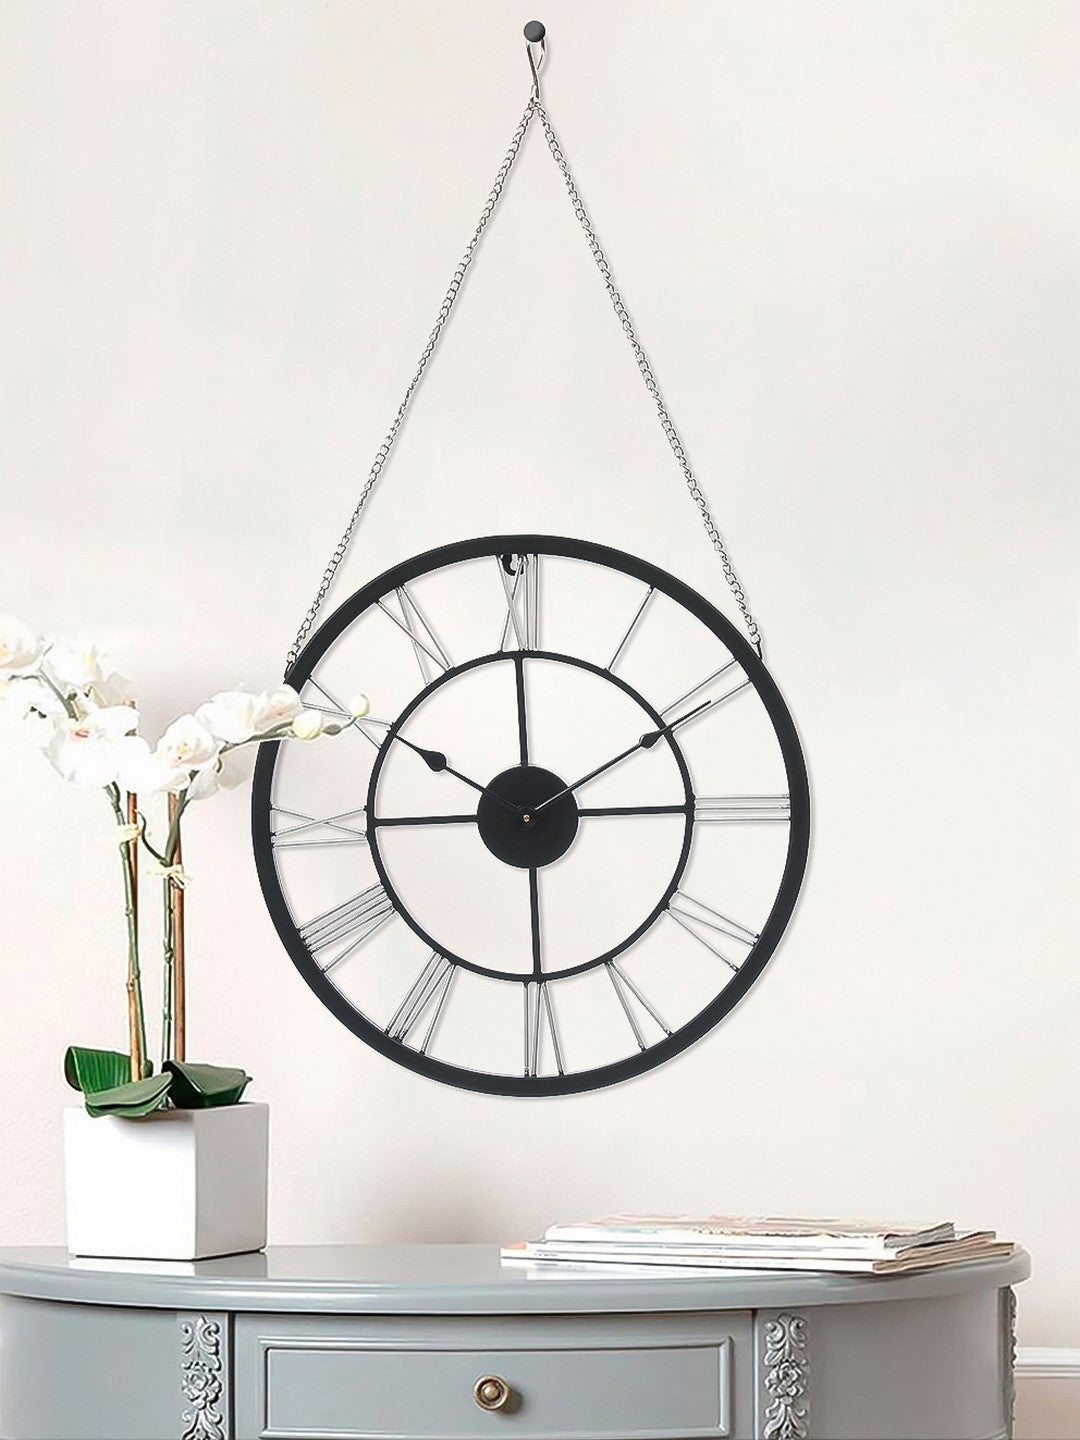 Round Black Iron Roman Numeral Handcrafted Analog Wall Clock With Hanging Chain 2